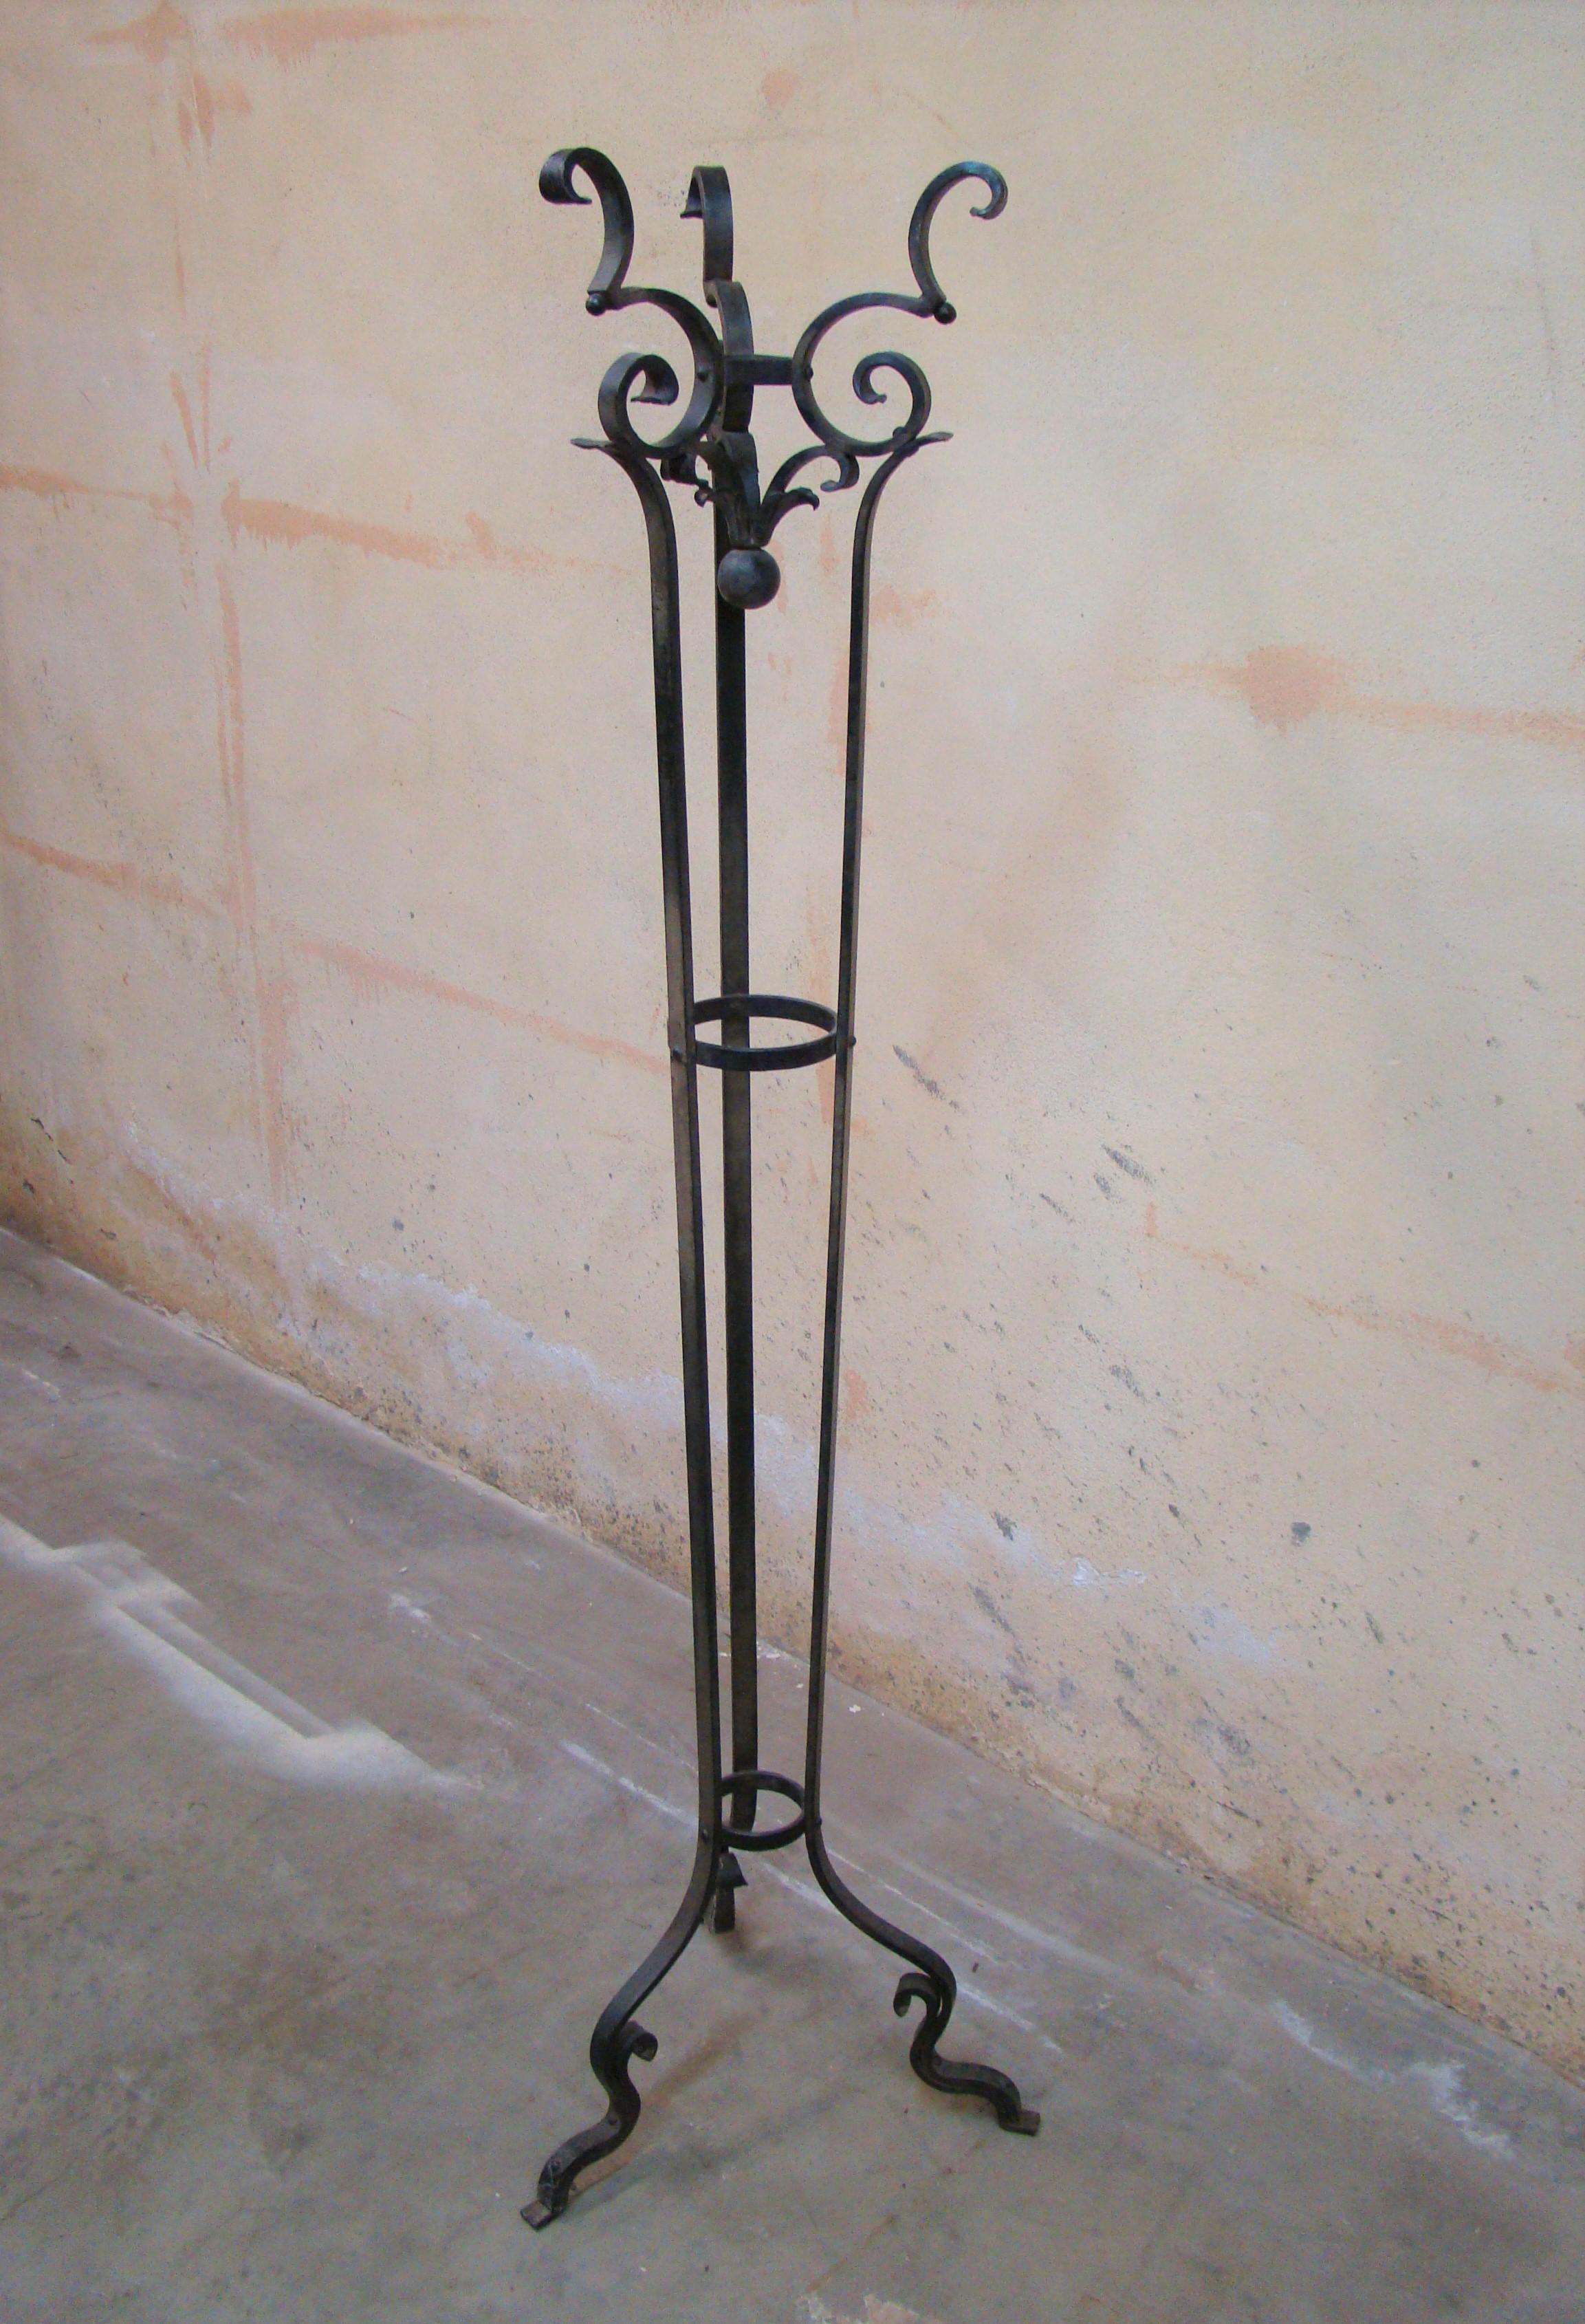 Antique coat stand, circa 1930s beautifully hand forged and scrolled from flat iron stock. Slightly Gothic, it features an inverted ball finial and circular bands that will accommodate your umbrella. Stable and solid, absolutely functional and well